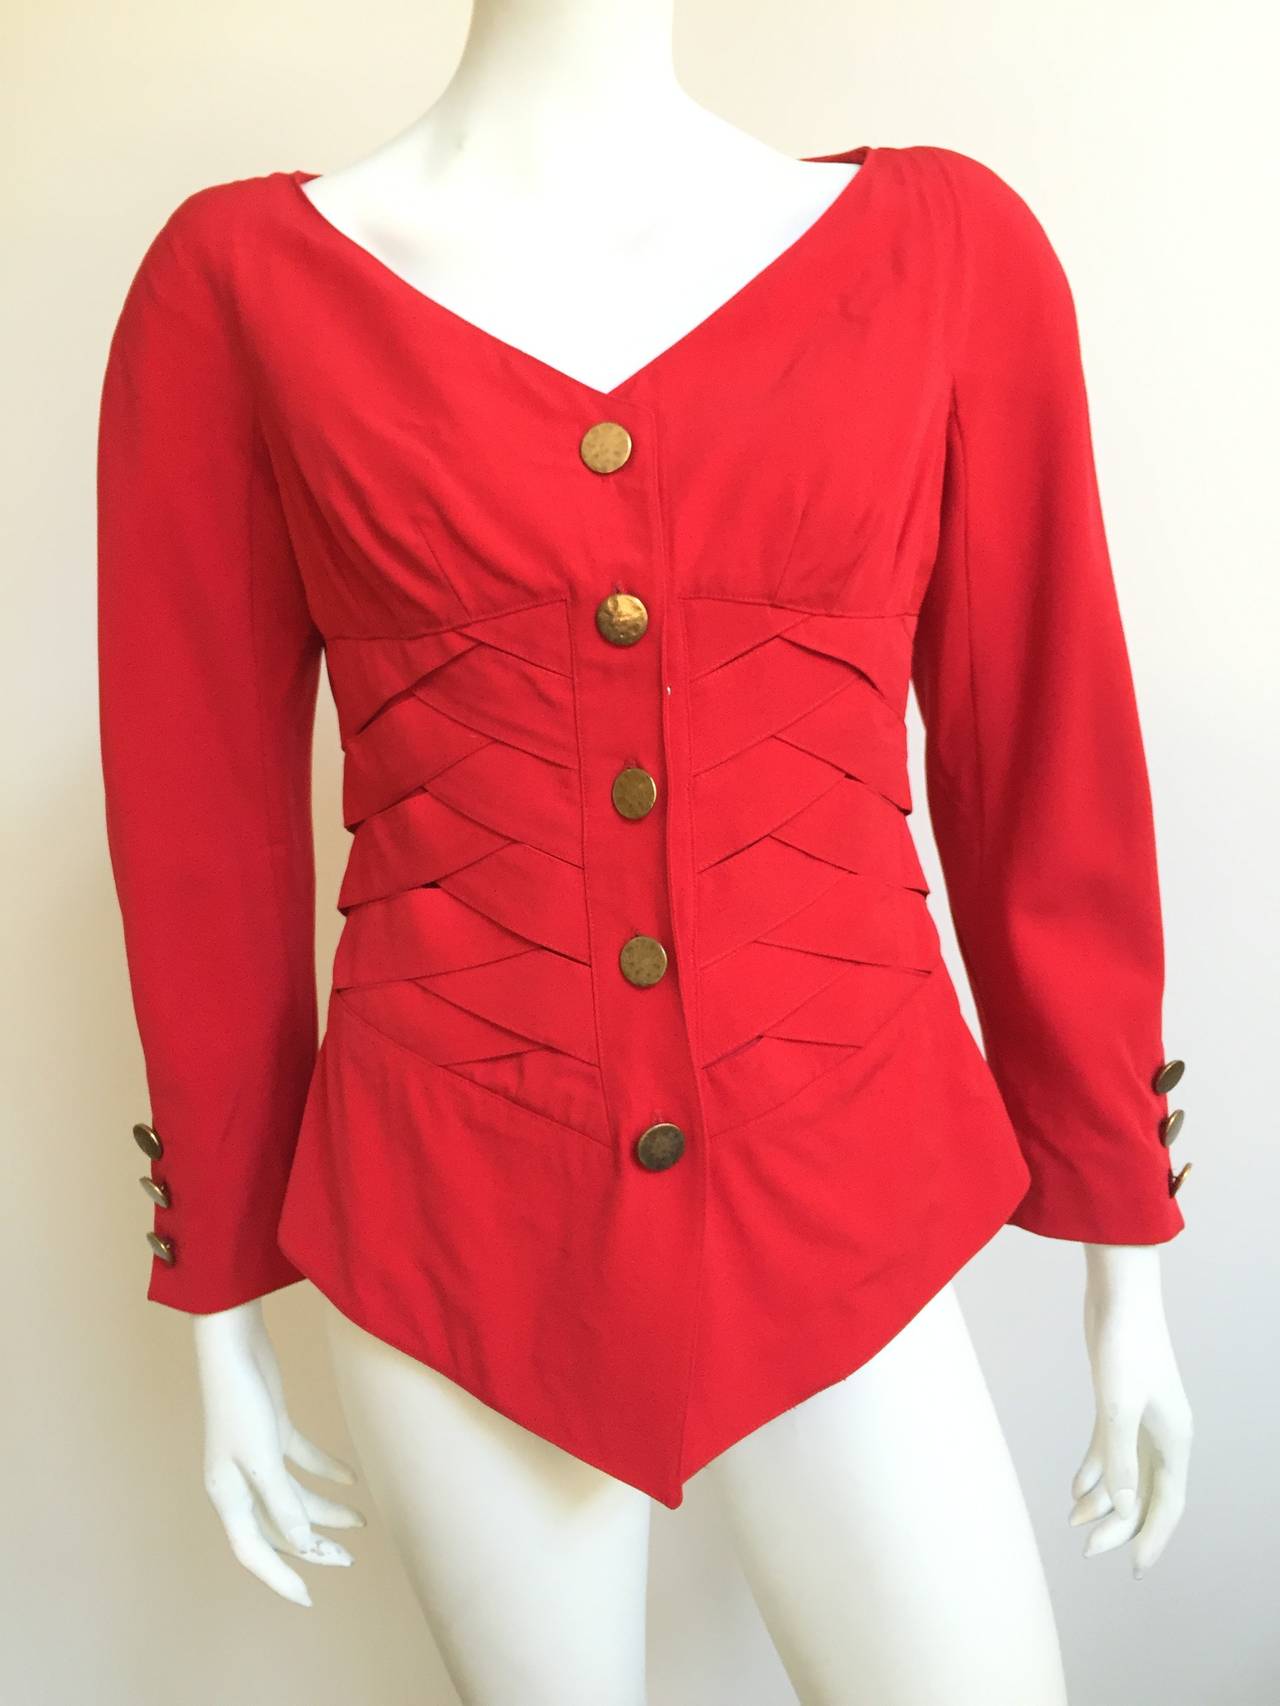 Jacques Molko 1980s red wool woven at waistline jacket is a French size 40 but fits like a modern USA size 6 ( Please see & use measurements so you know this item will fit you to perfection).
Made in France.
Lined.
Measurements are:
38. 1/2